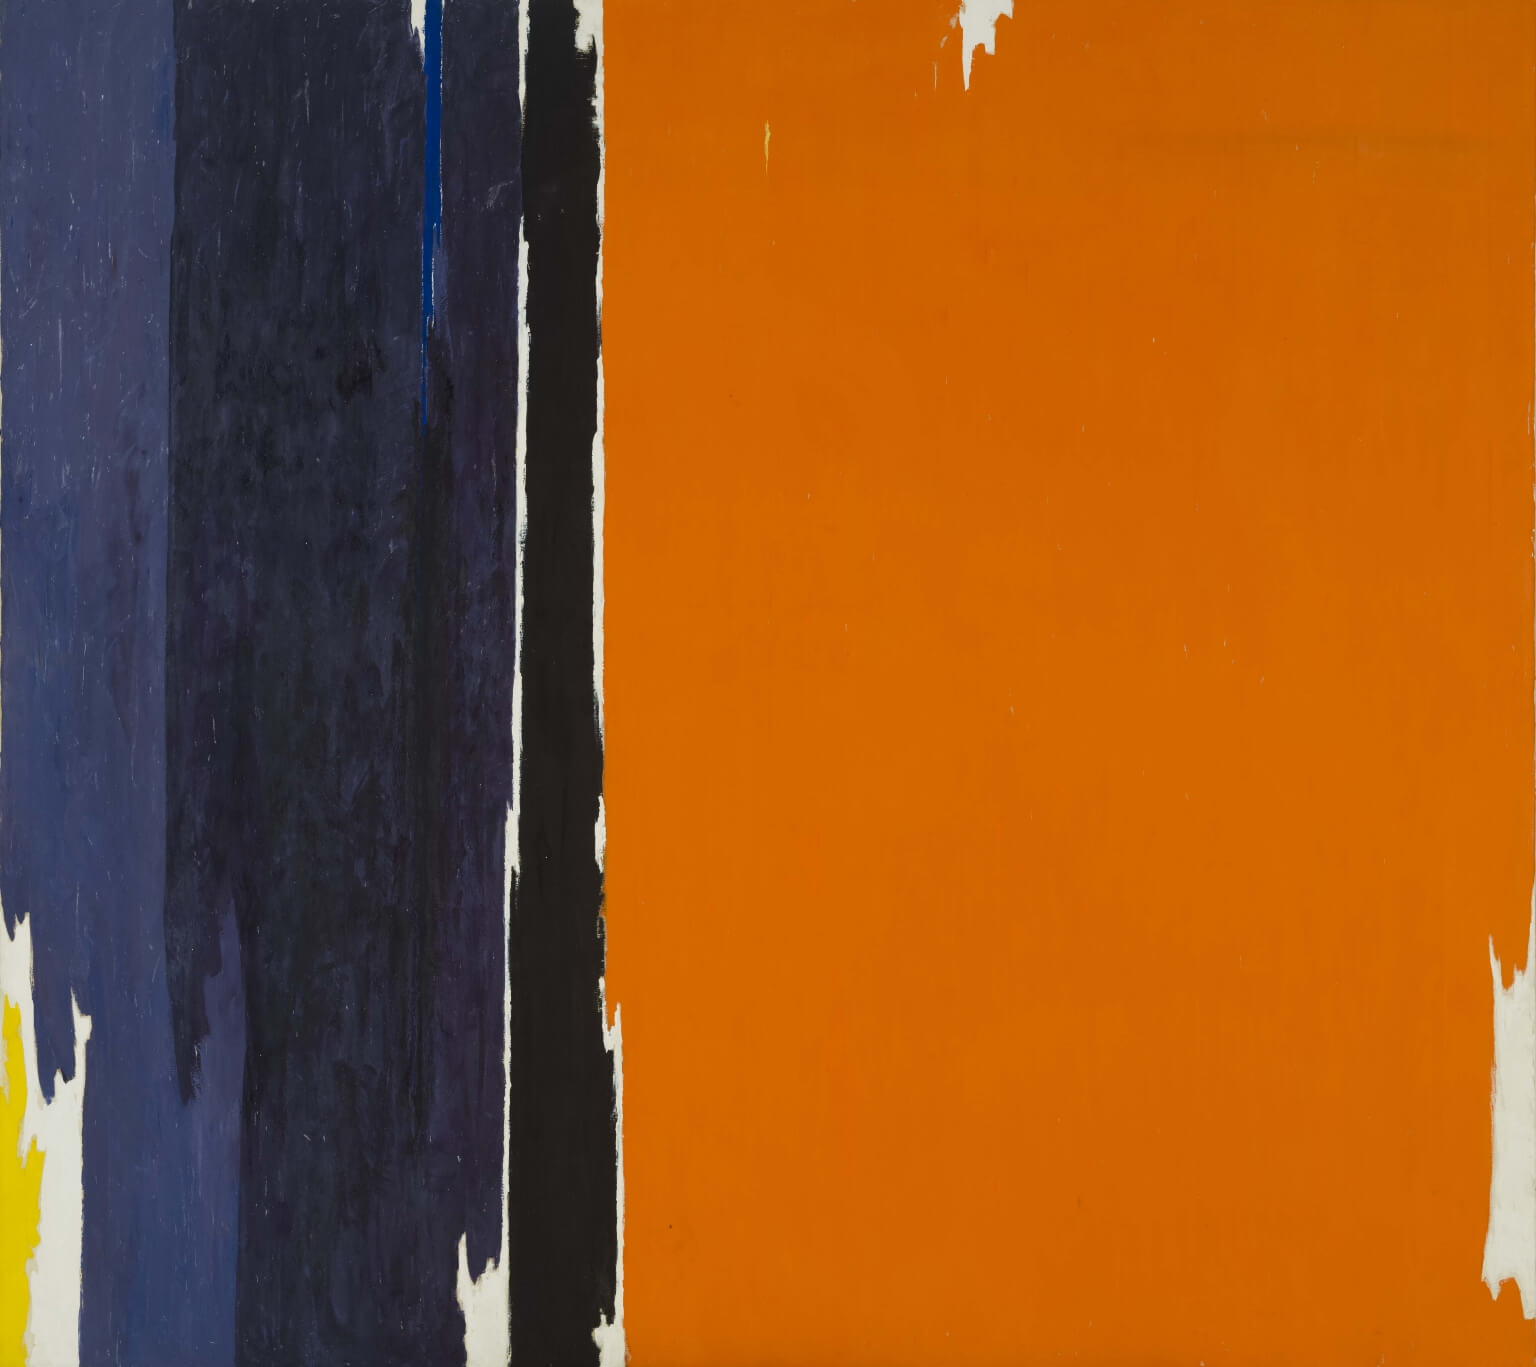 Abstract horizontal painting with about two-thirds of it covered in a dark orange, divided by a thick black vertical line, and two dark shades of blue on the left side